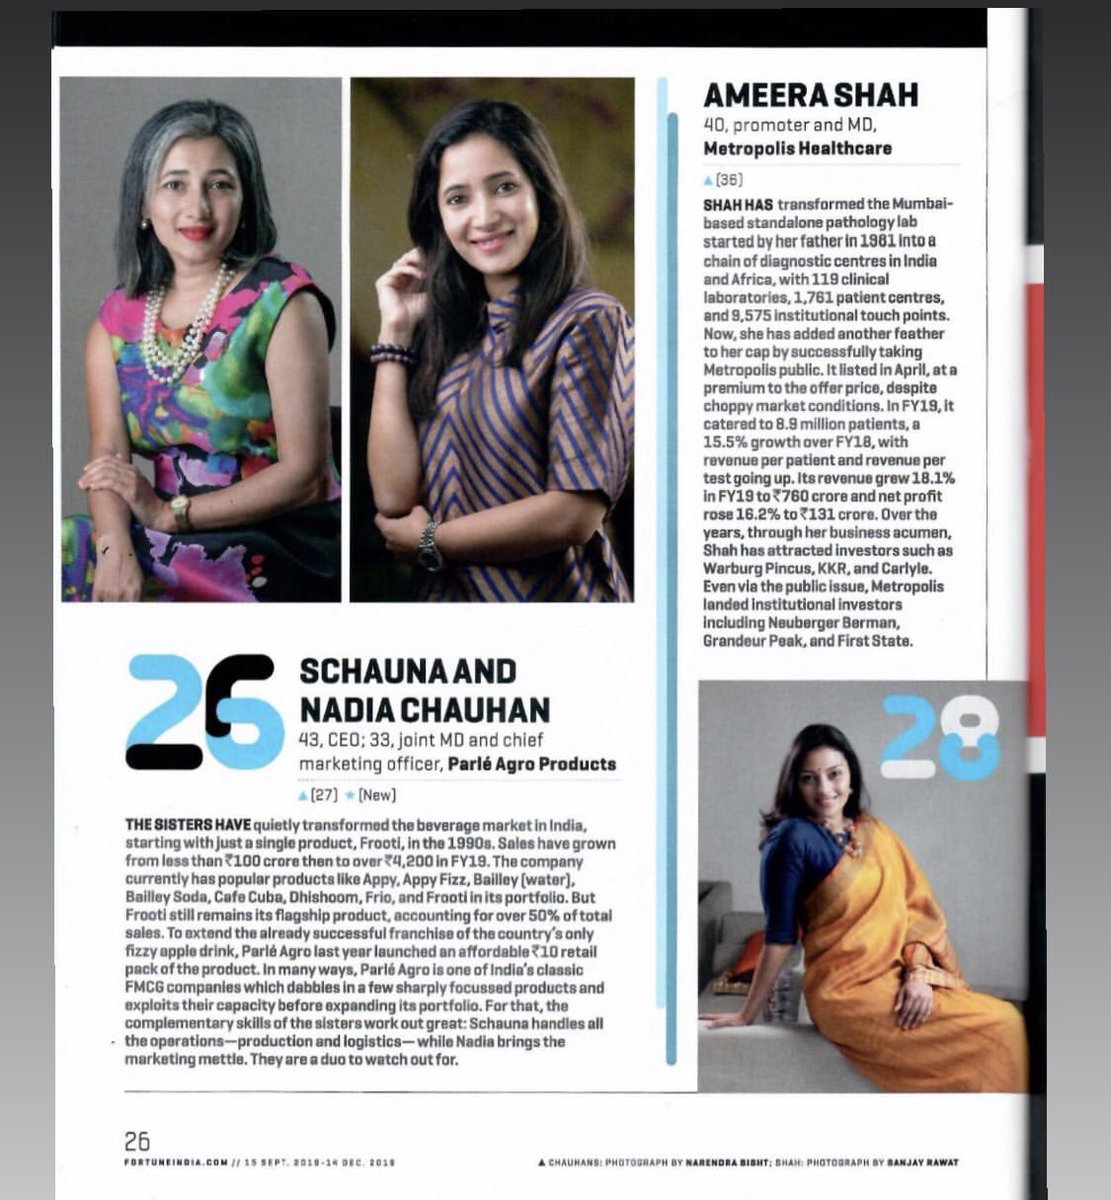 Many congratulations to @nadiachauhan & @AmeeraShah  👏👏🙂🙂

Most powerful women in business. @FortuneIndia